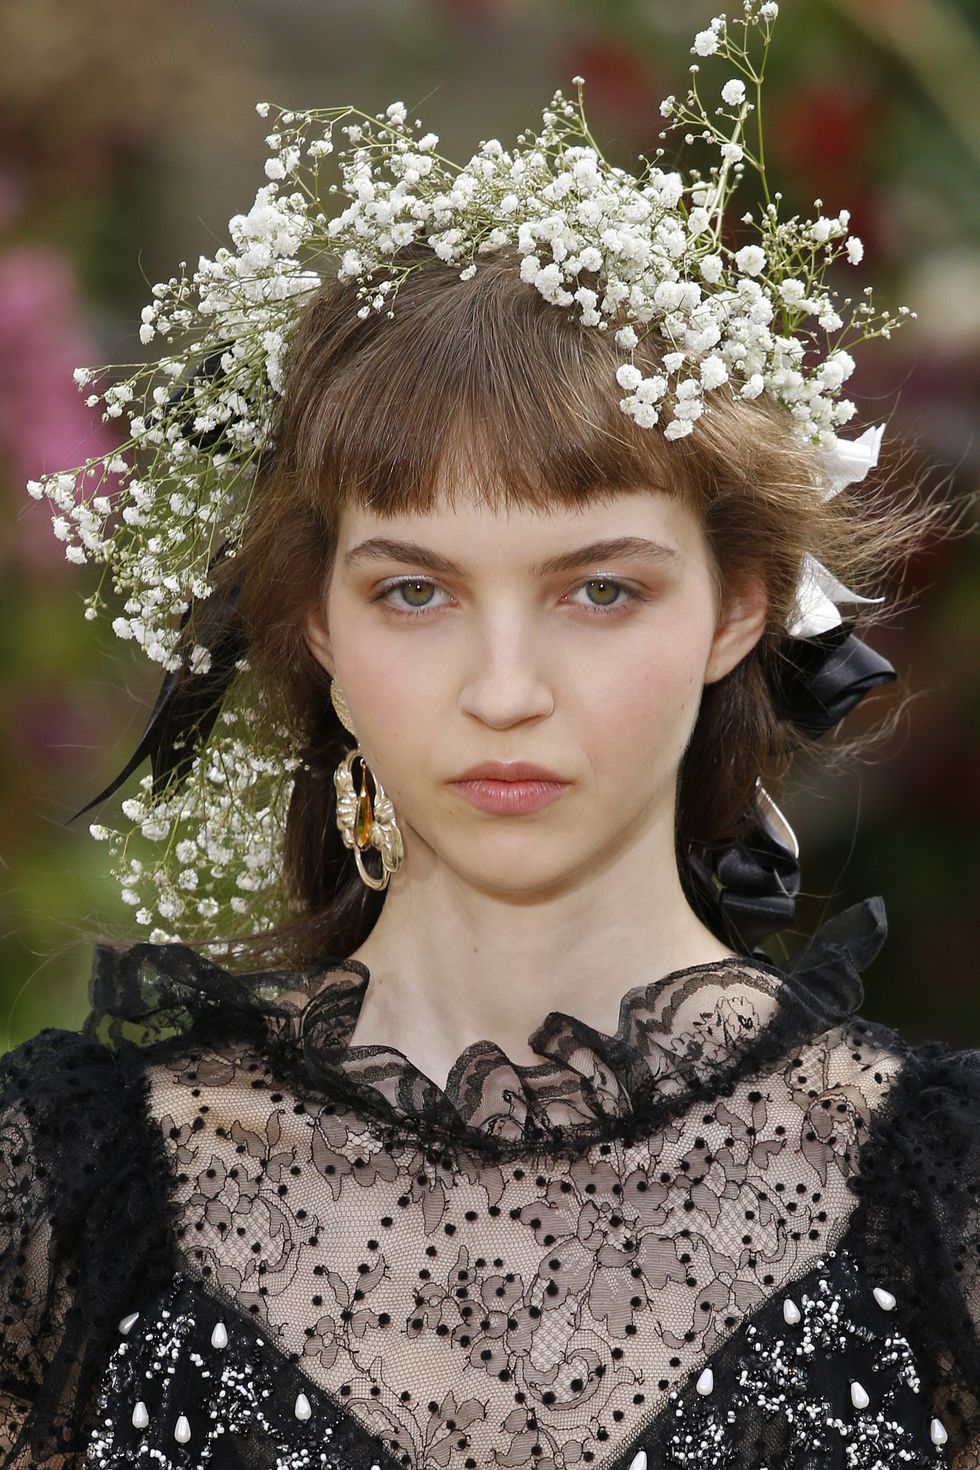 <p>Finally, for a wedding or a particularly important Thursday, my favorite hair look&nbsp;of all time: <a href="http://www.marieclaire.com/fashion/a28044/rodartes-spring-2018-collection-flower-crowns/" target="_blank" data-tracking-id="recirc-text-link">Rodarte's explosion of ribbon and&nbsp;baby's breath and cascading hair</a><span class="redactor-invisible-space" data-verified="redactor" data-redactor-tag="span" data-redactor-class="redactor-invisible-space"><a href="http://www.marieclaire.com/fashion/a28044/rodartes-spring-2018-collection-flower-crowns/"> and cascading hair</a>. Ain't it purdy?&nbsp;</span></p><p><span class="redactor-invisible-space" data-verified="redactor" data-redactor-tag="span" data-redactor-class="redactor-invisible-space"><em data-redactor-tag="em" data-verified="redactor">Shop similar: ASOS, $19</em></span></p><p><span class="redactor-invisible-space" data-verified="redactor" data-redactor-tag="span" data-redactor-class="redactor-invisible-space"><strong data-redactor-tag="strong" data-verified="redactor">BUY IT: <a href="http://us.asos.com/asos/asos-wedding-crystal-flower-back-hair-clip/prd/7719813?clr=peach&amp;SearchQuery=&amp;cid=4174&amp;pgesize=204&amp;pge=0&amp;totalstyles=274&amp;gridsize=3&amp;gridrow=16&amp;gridcolumn=1" target="_blank" data-tracking-id="recirc-text-link">asos.com</a>.</strong></span></p>